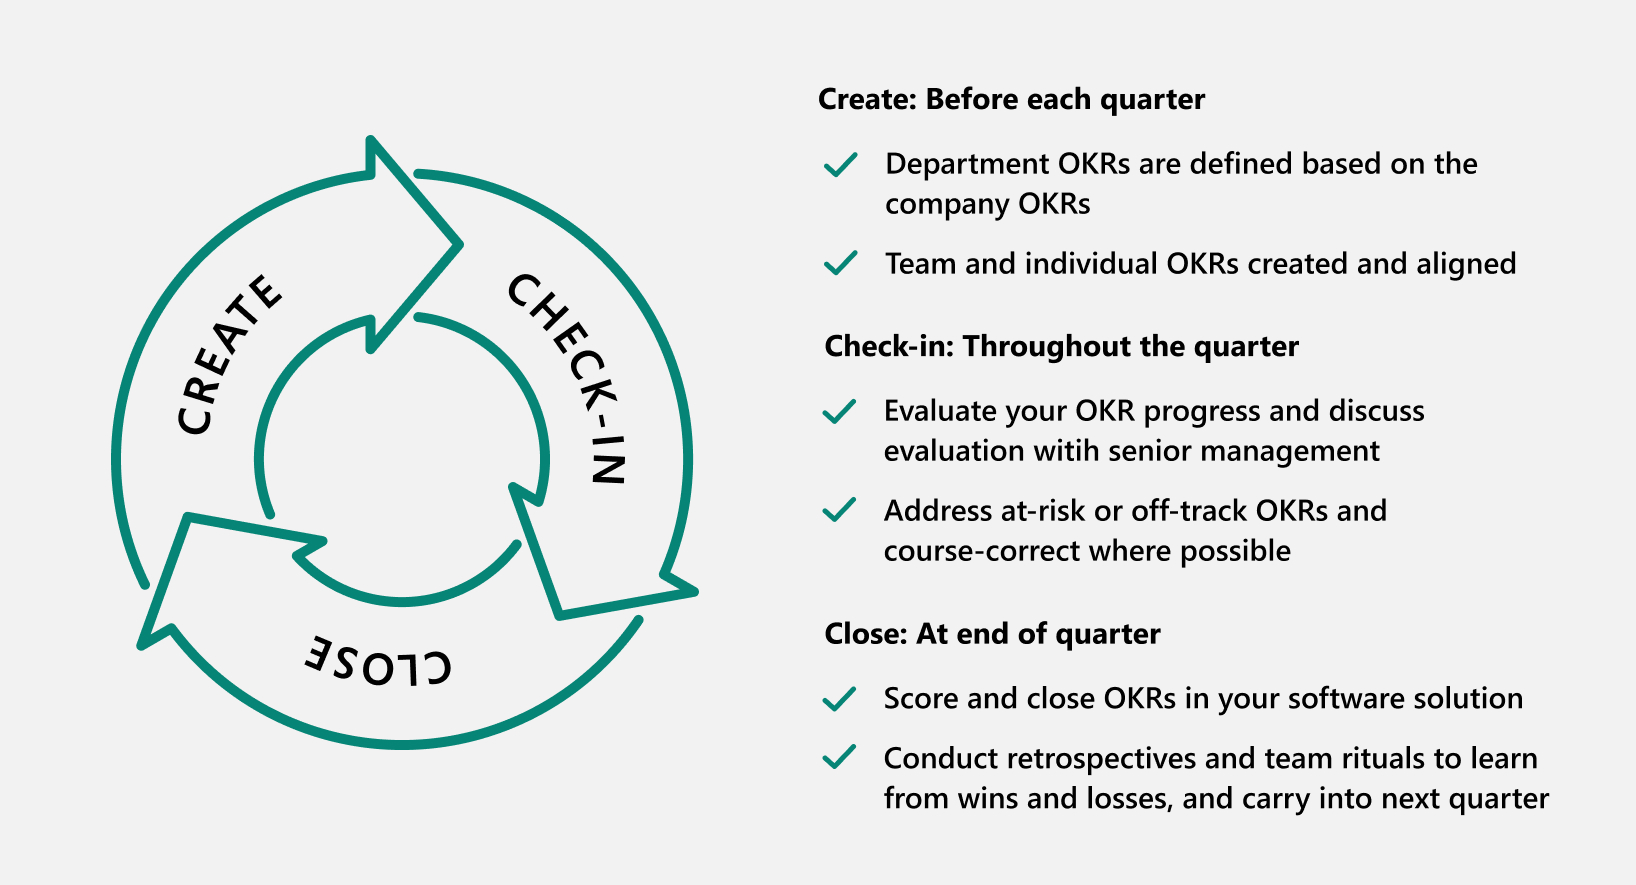 Diagram of the three Cs cycle: create, check-in, and close with text examples of what happens in each phase.